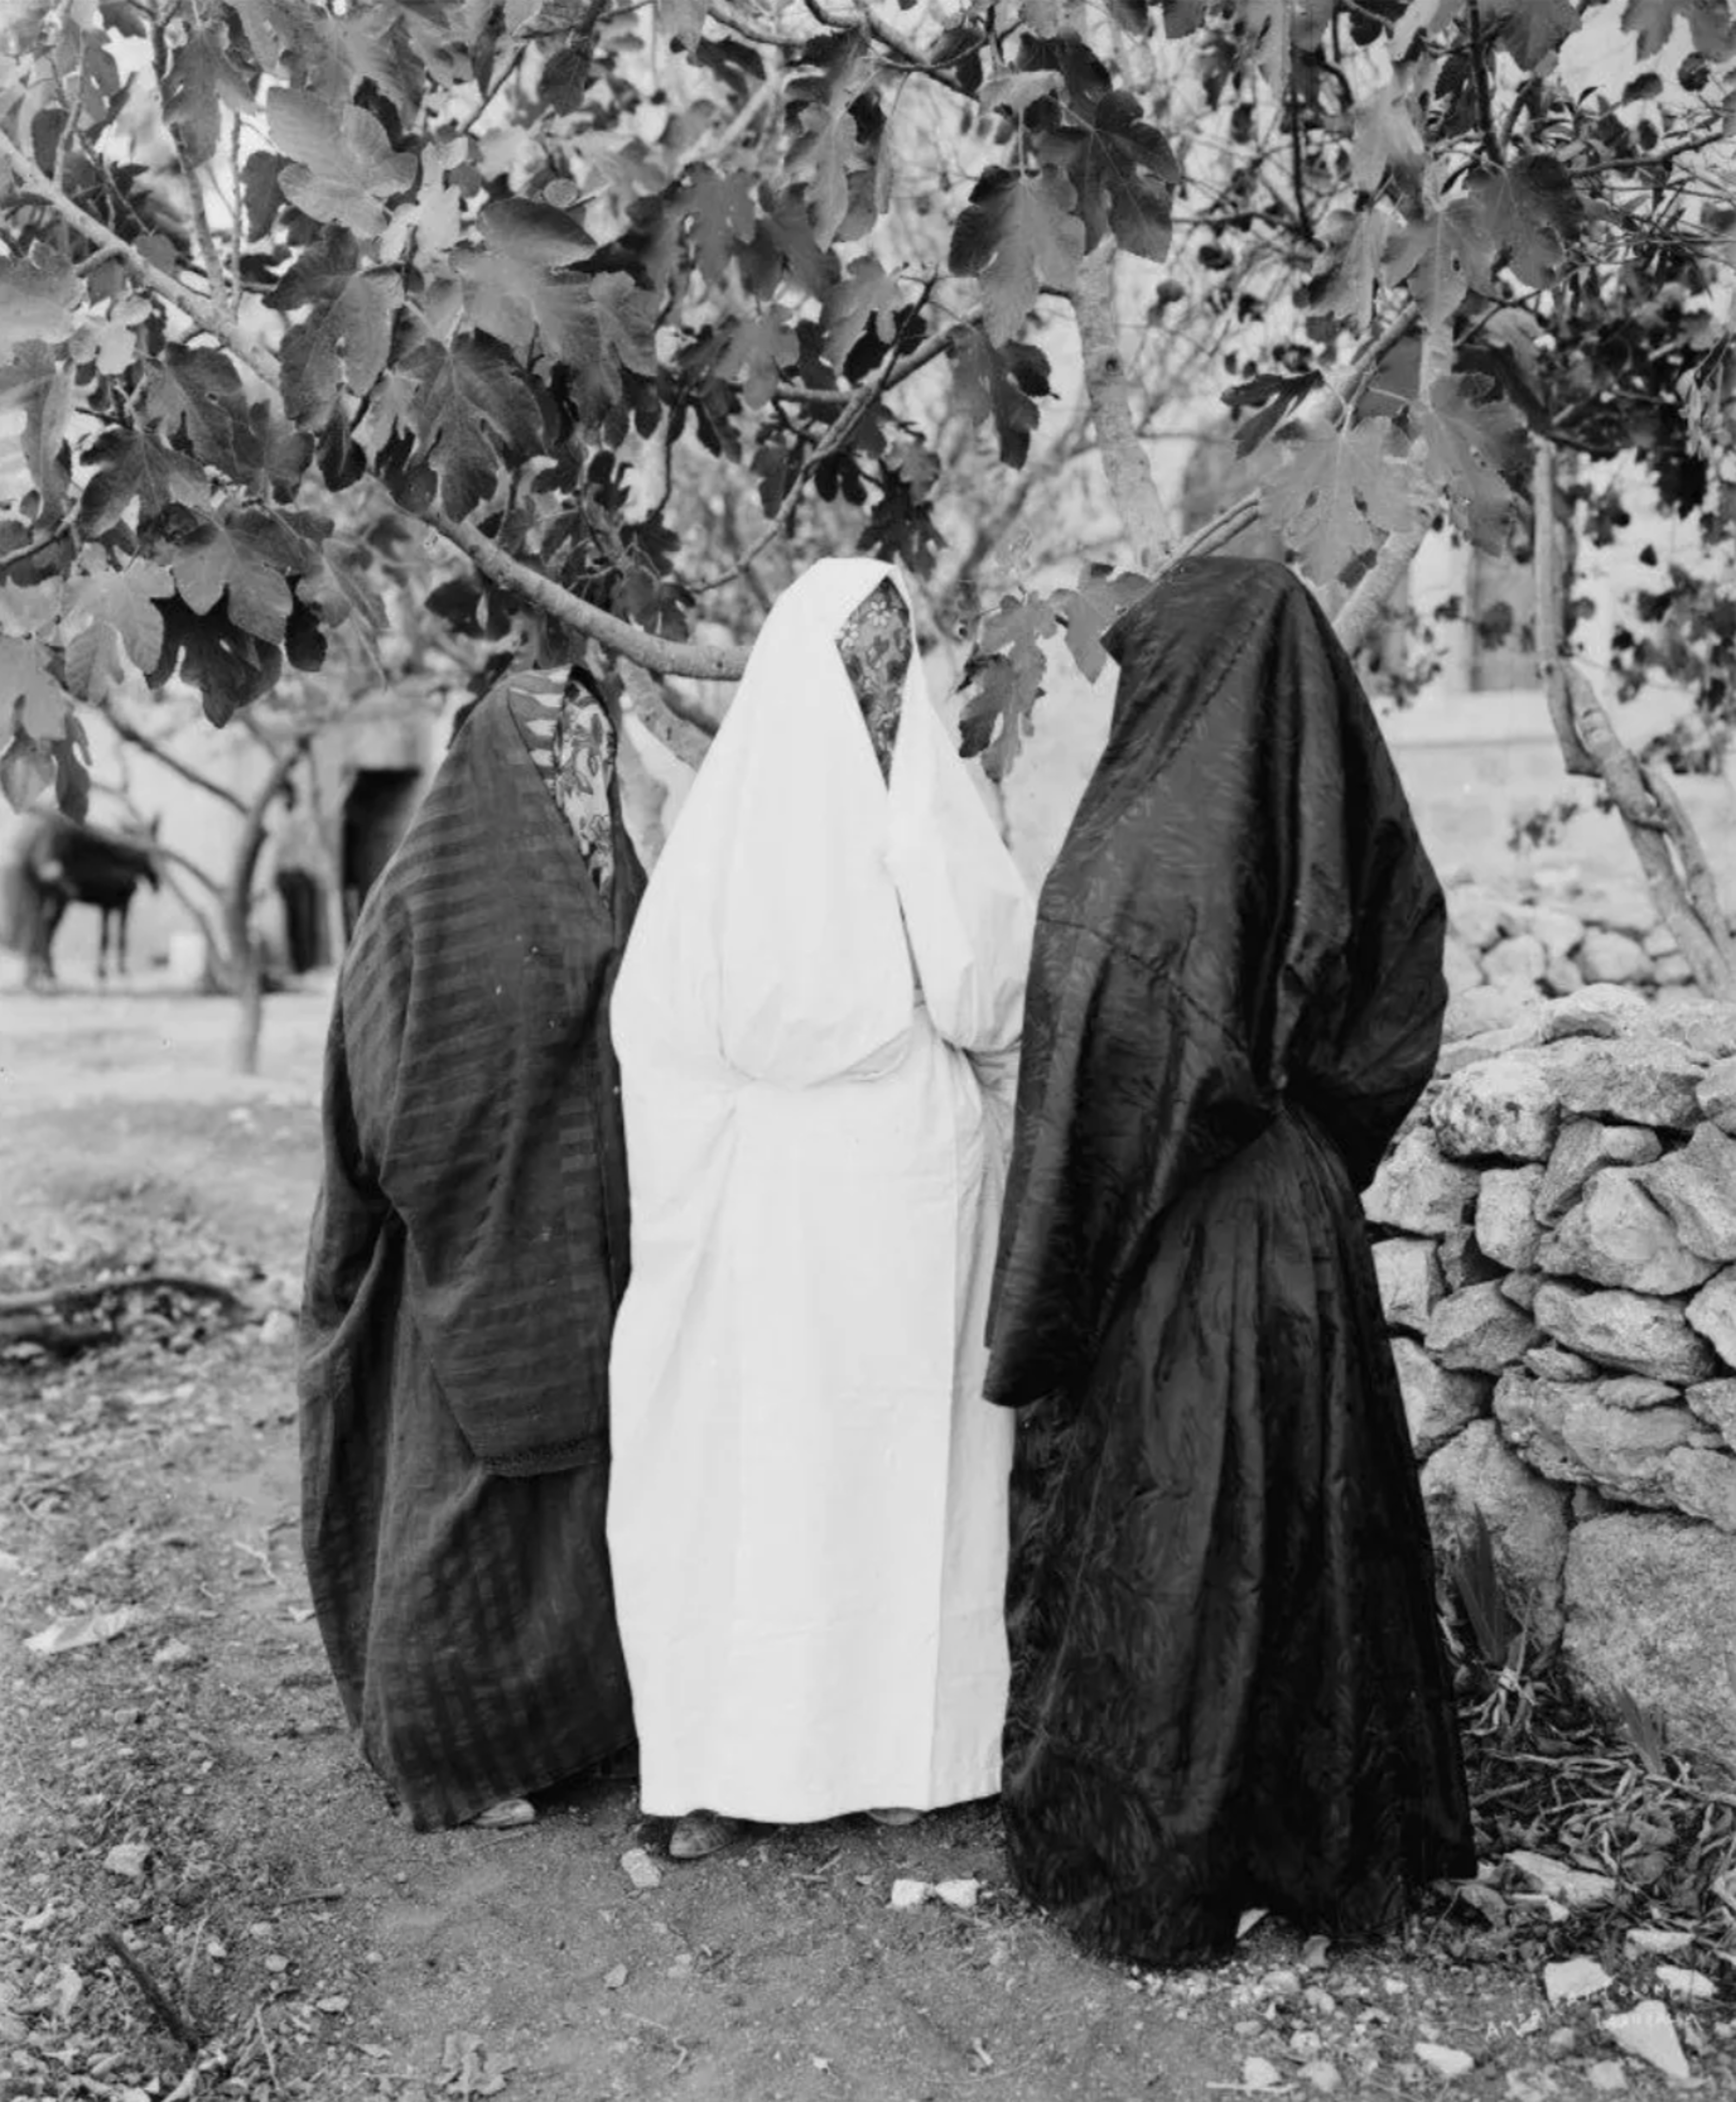 Historical black and white photograph of Palestinian women under a fig tree.